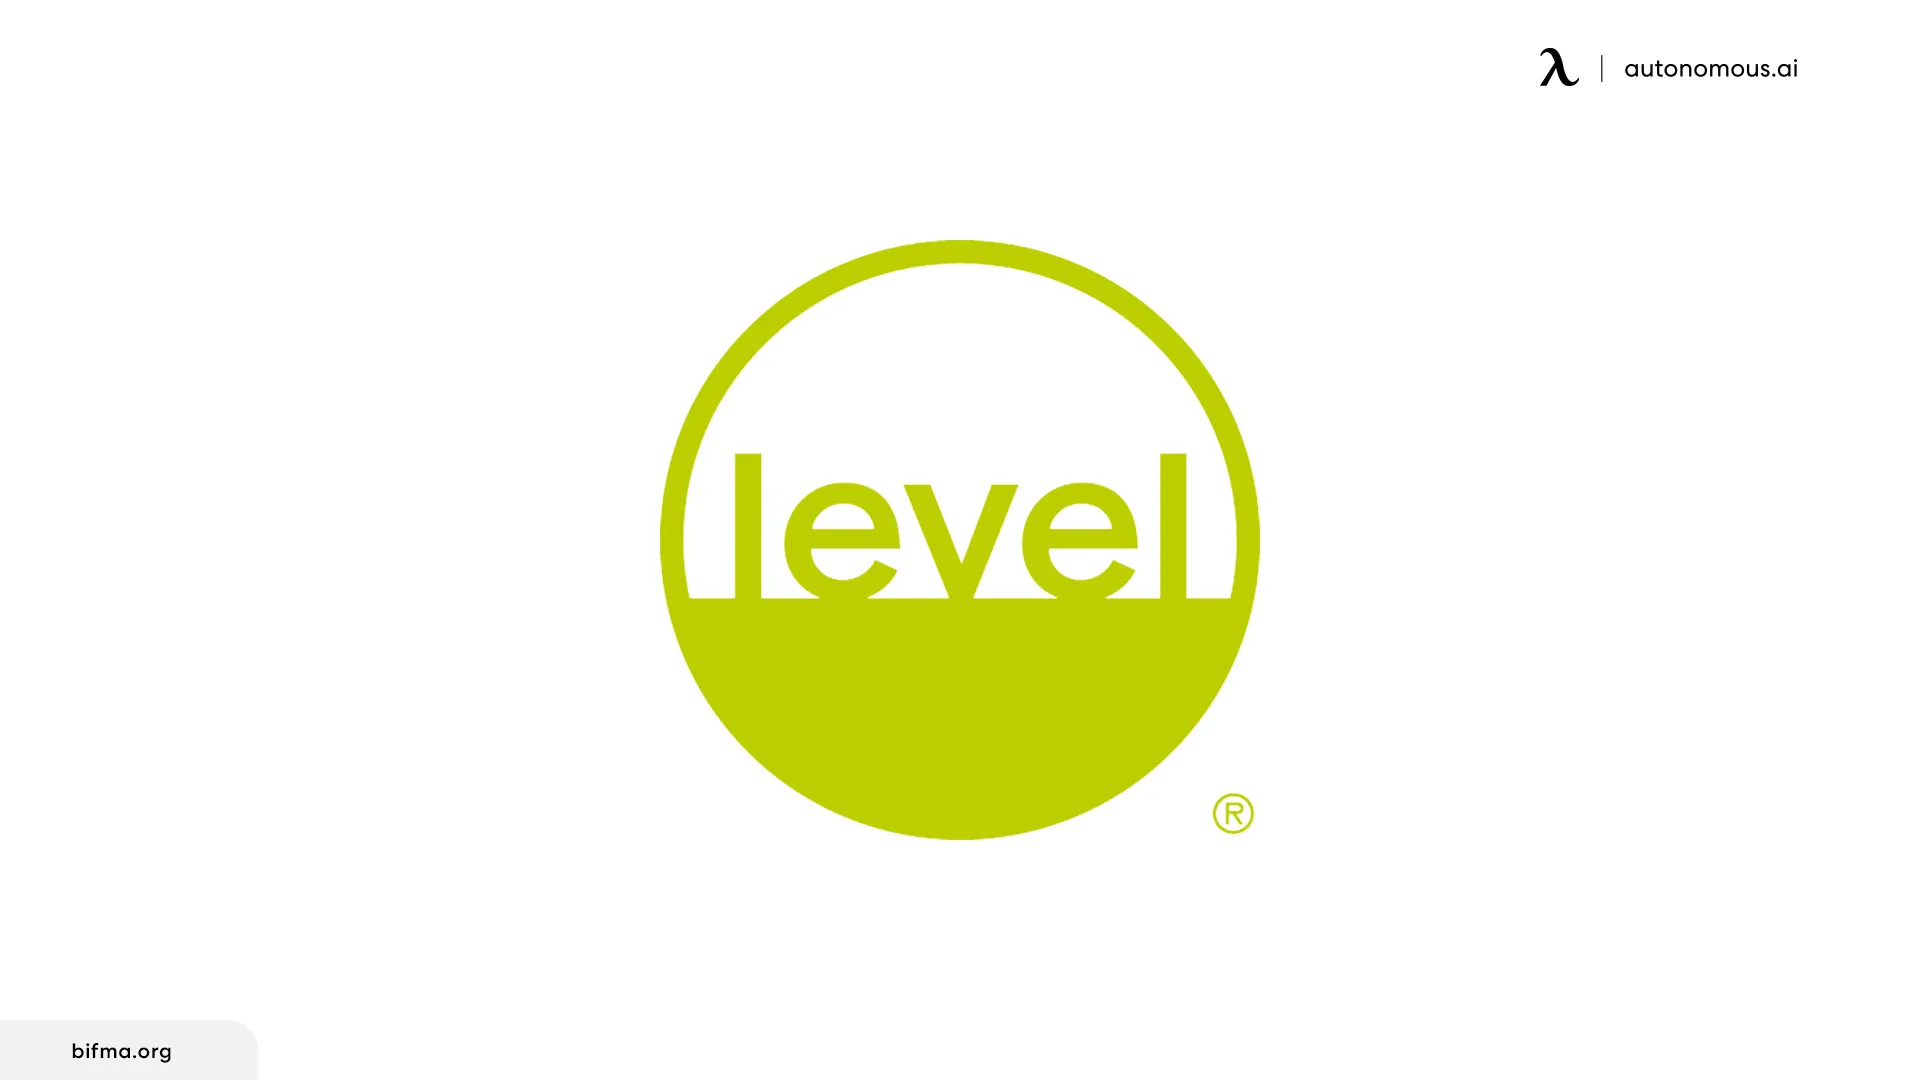 BIFMA Level Certification - sustainable office furniture